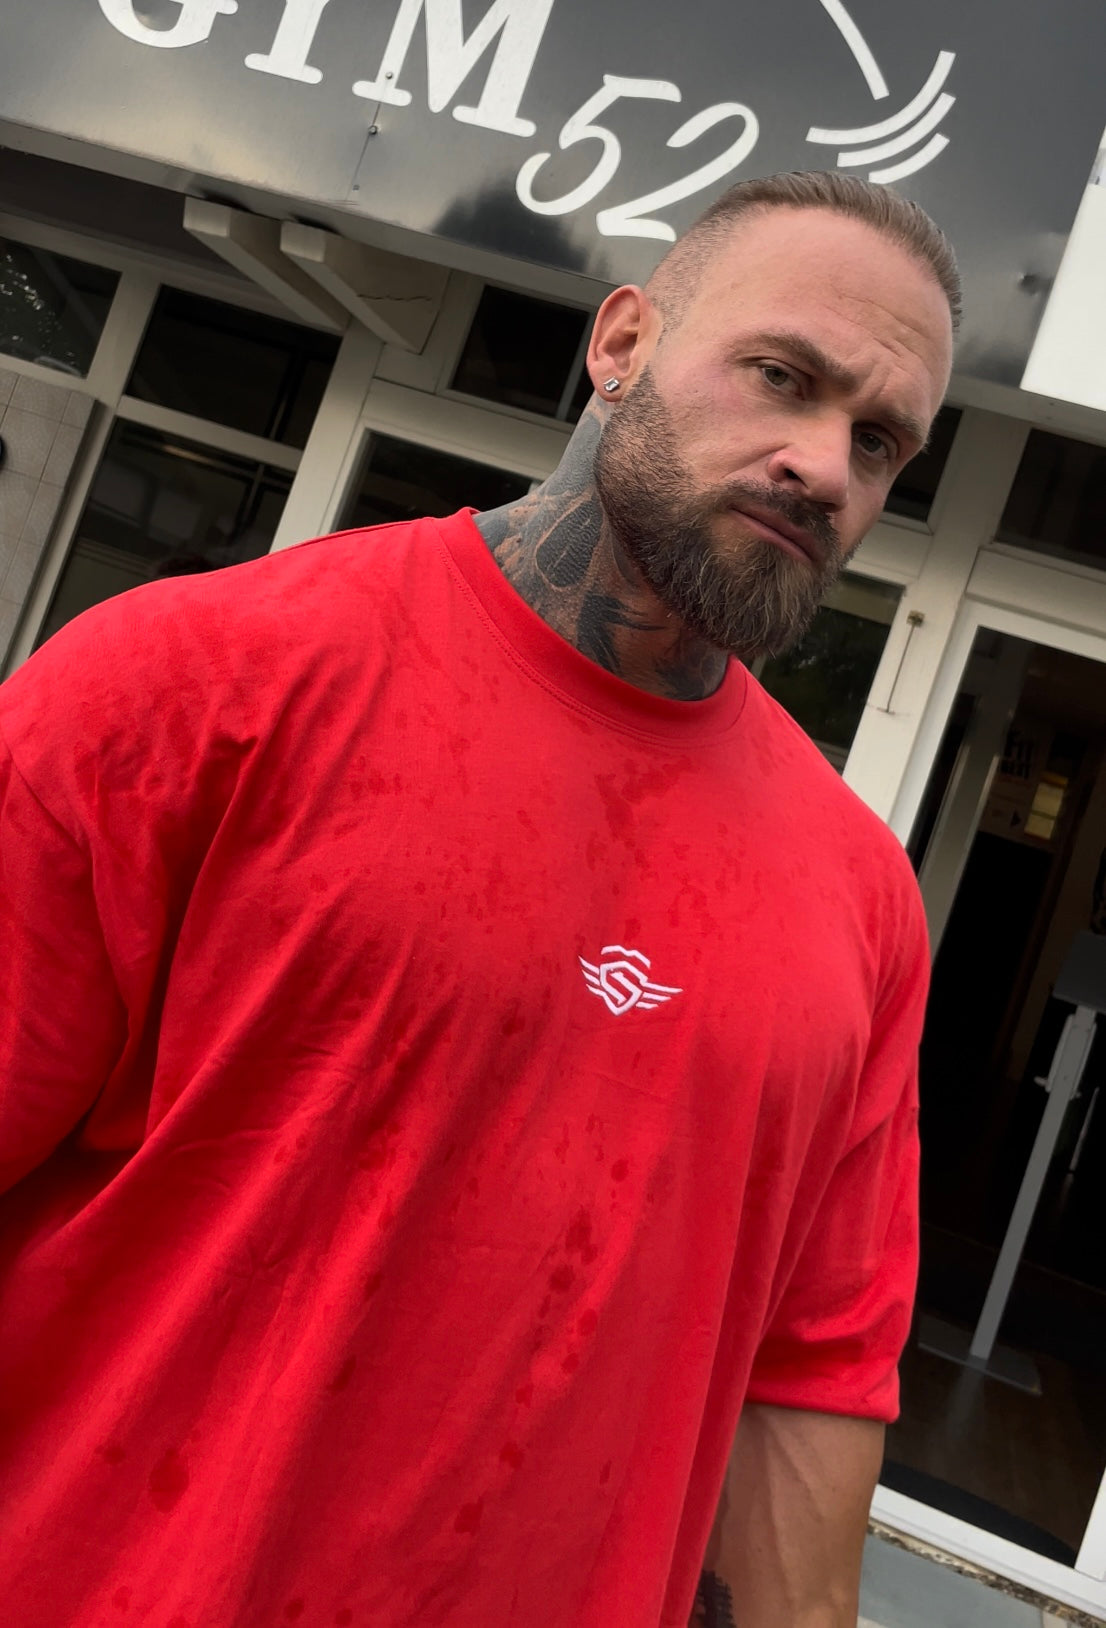 MASSIVE SOLDIER OVERSIZE SHIRT RED 